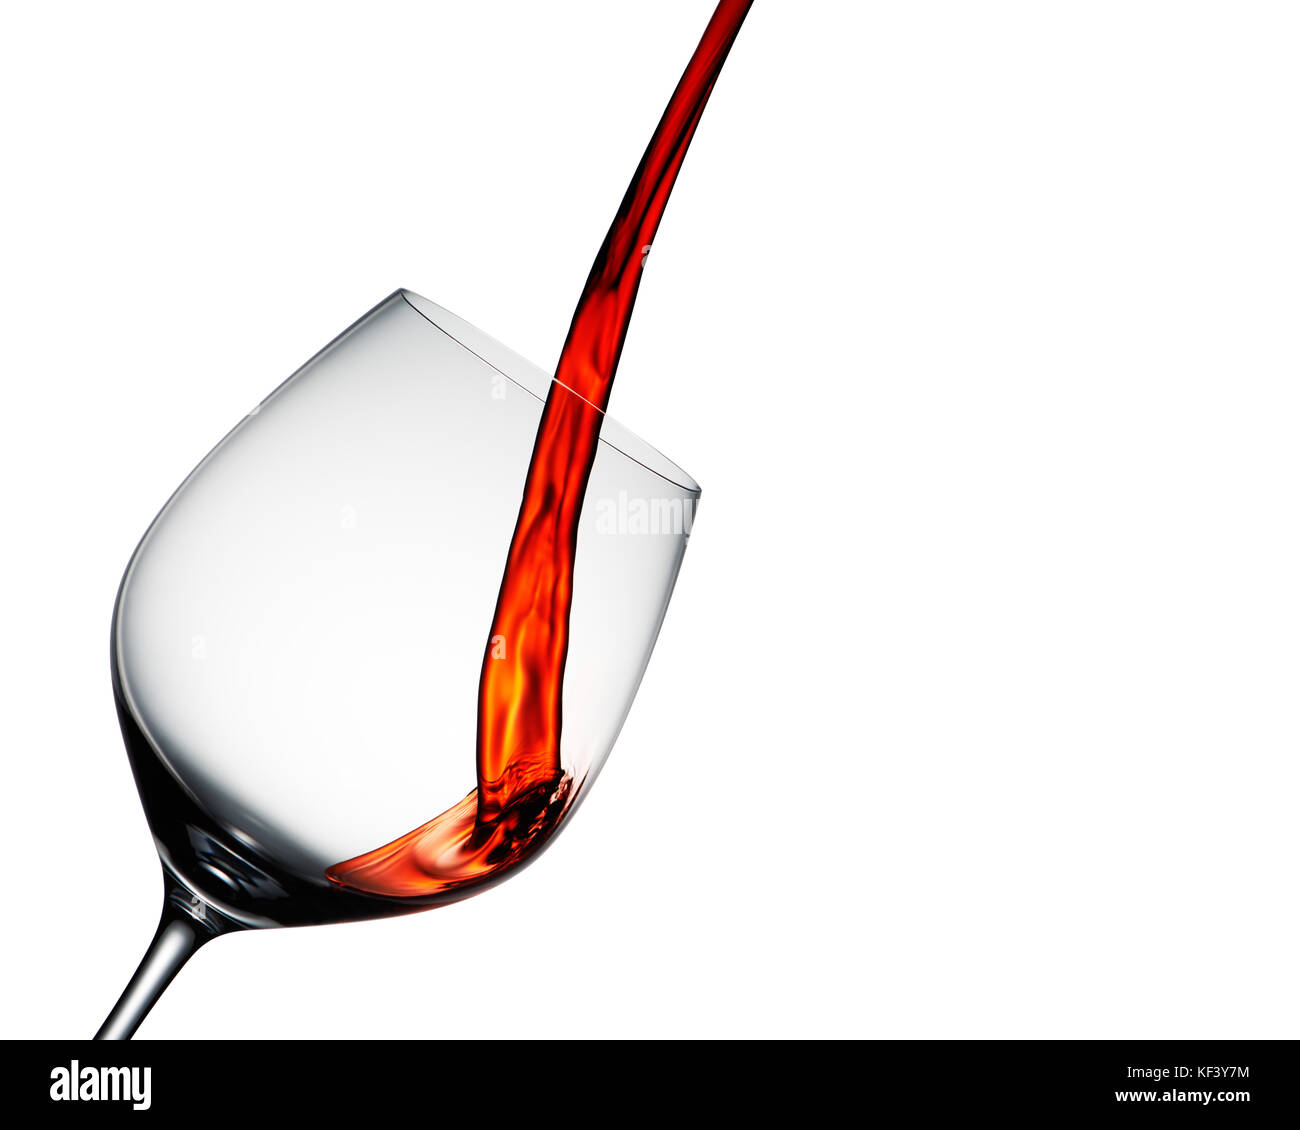 Red wine poured into elegant wine glass isolated on white Stock Photo